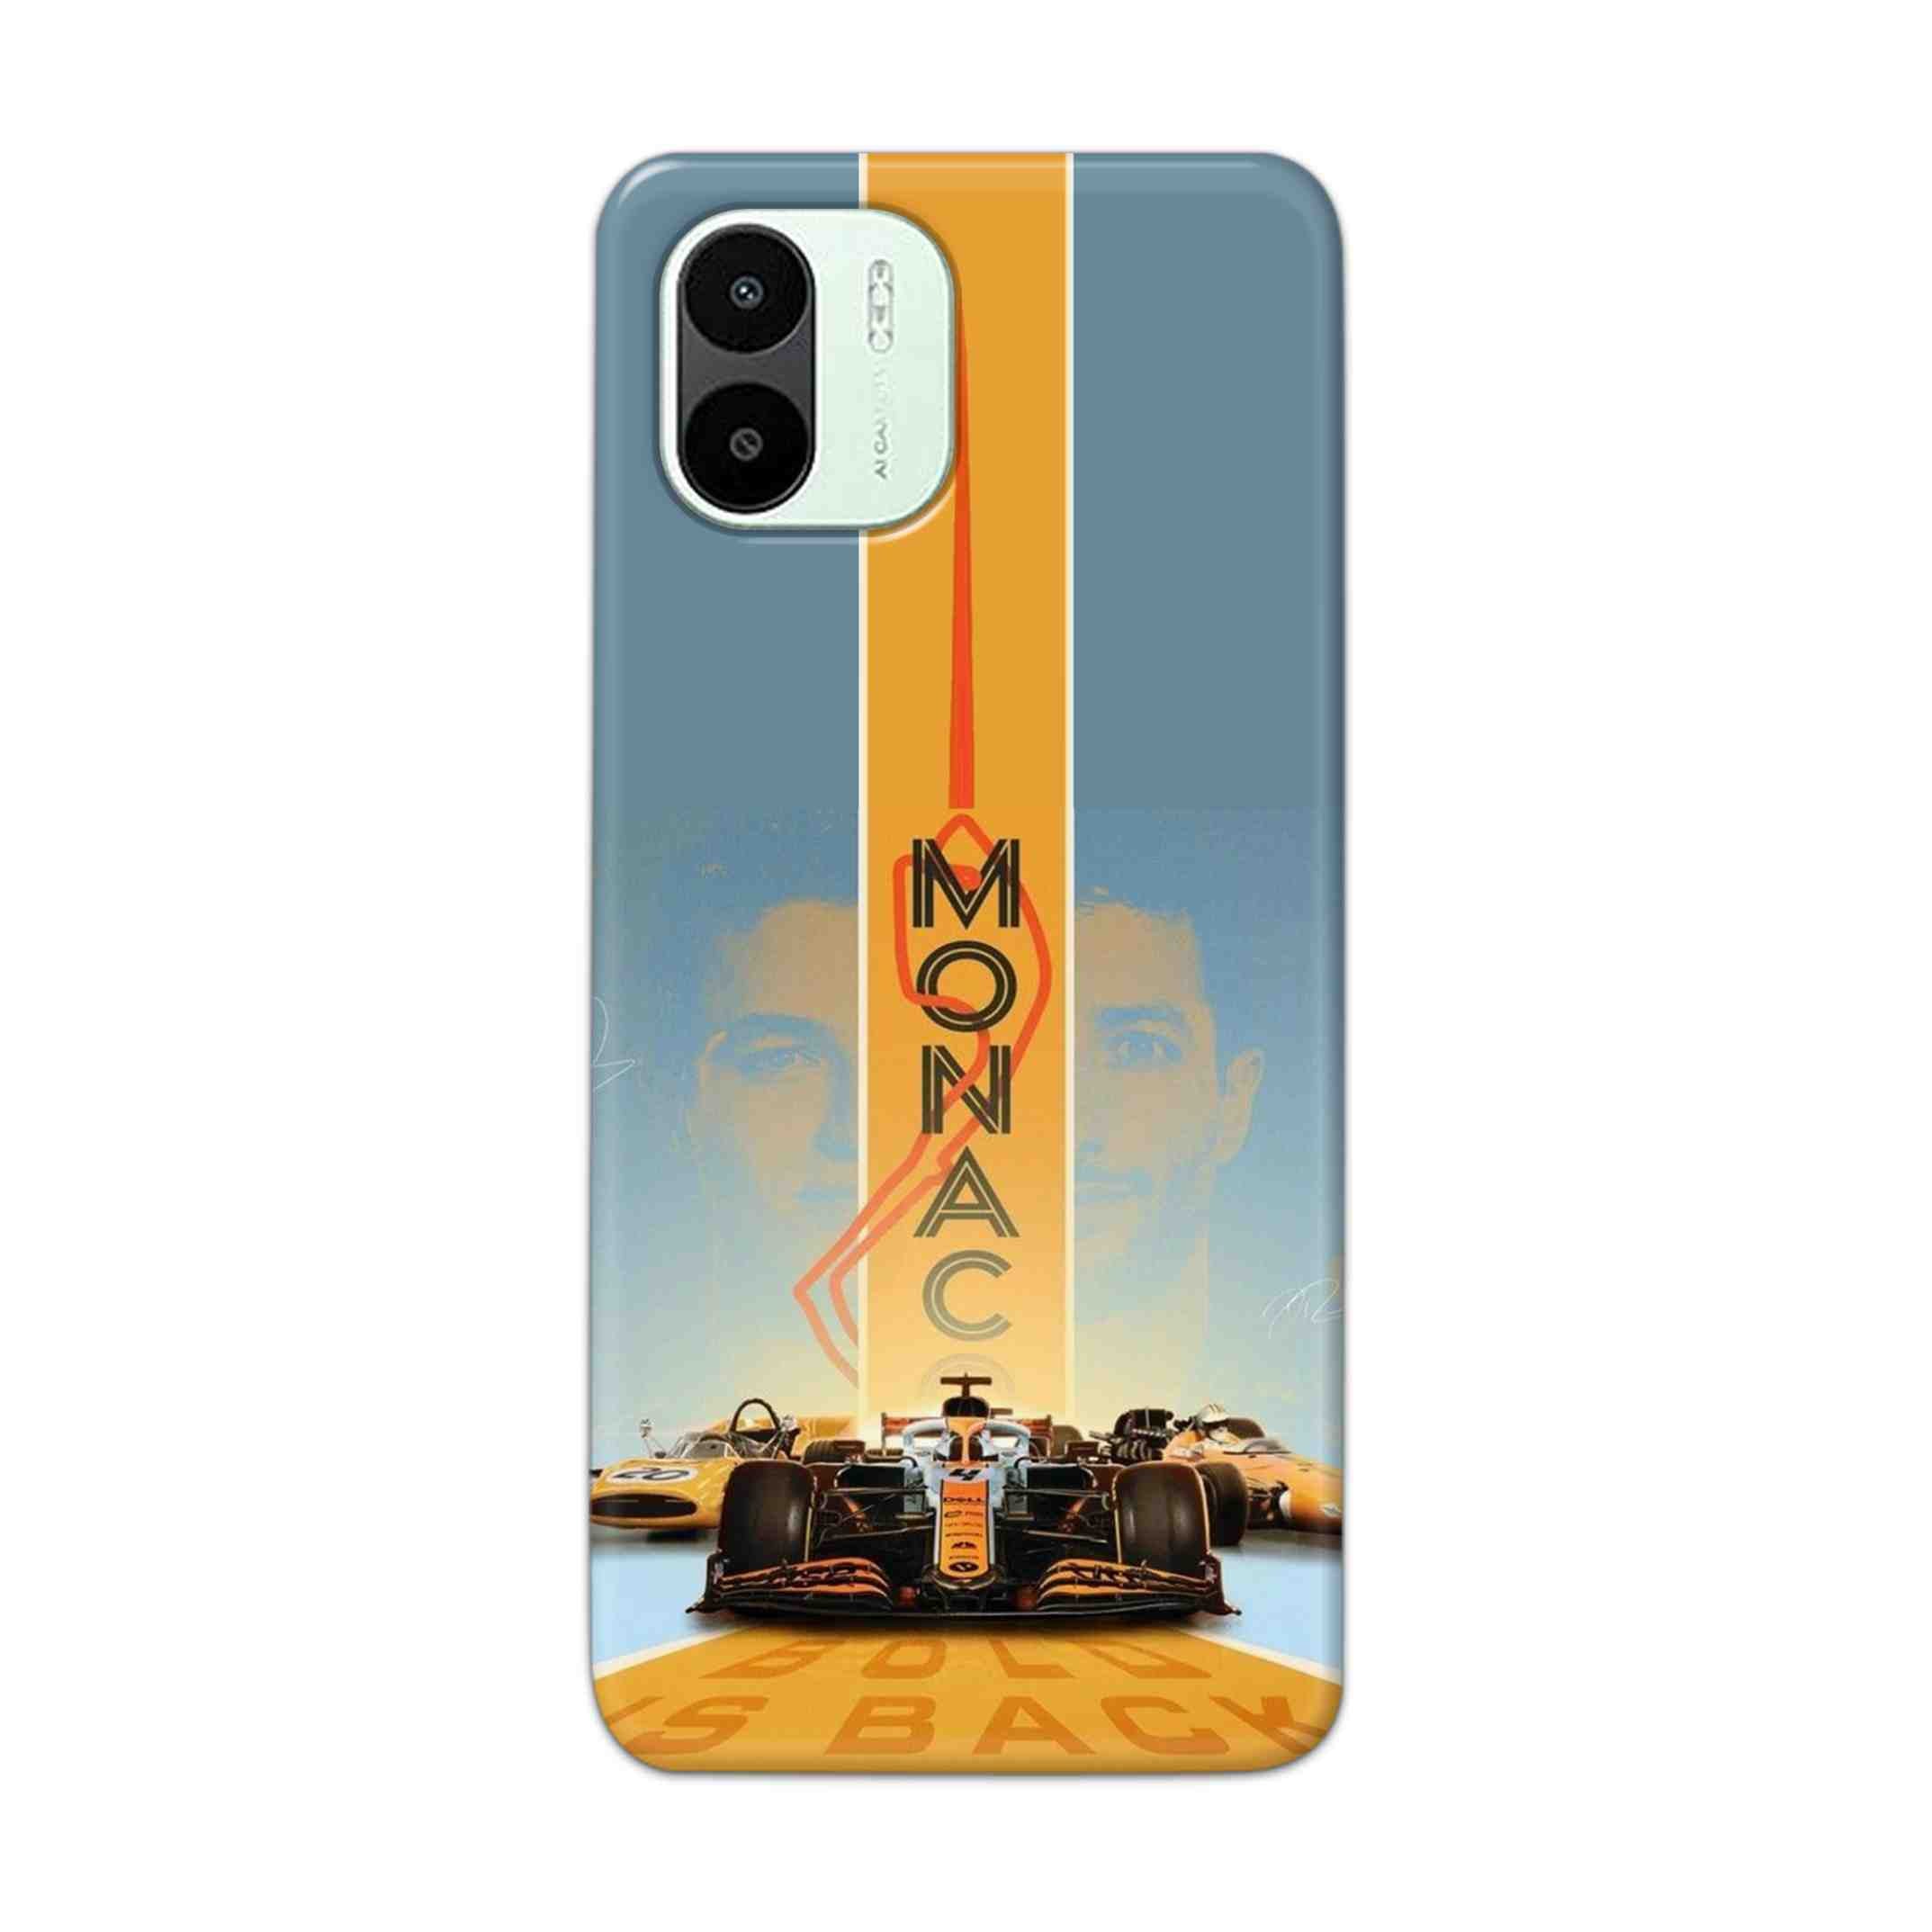 Buy Monac Formula Hard Back Mobile Phone Case Cover For Xiaomi Redmi A1 5G Online